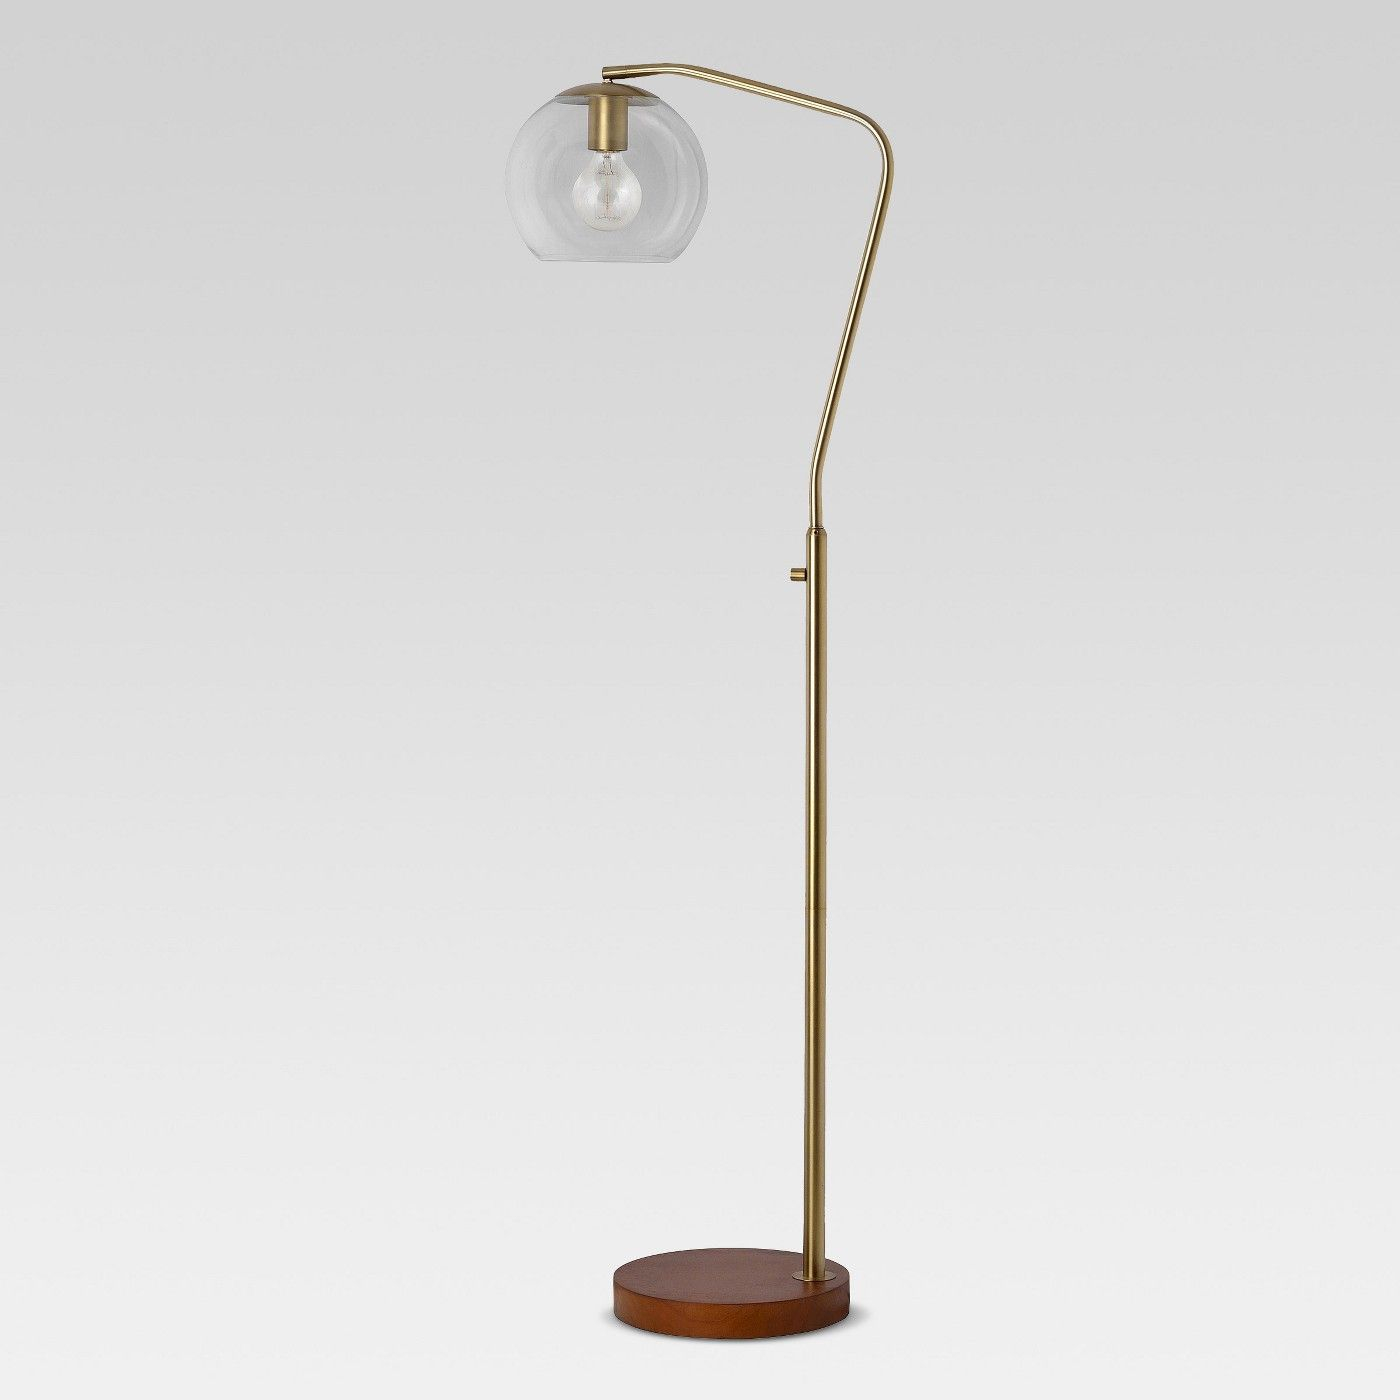 Menlo Glass Globe Floor Lamp Project 62 Image 1 Of 4 within dimensions 1400 X 1400